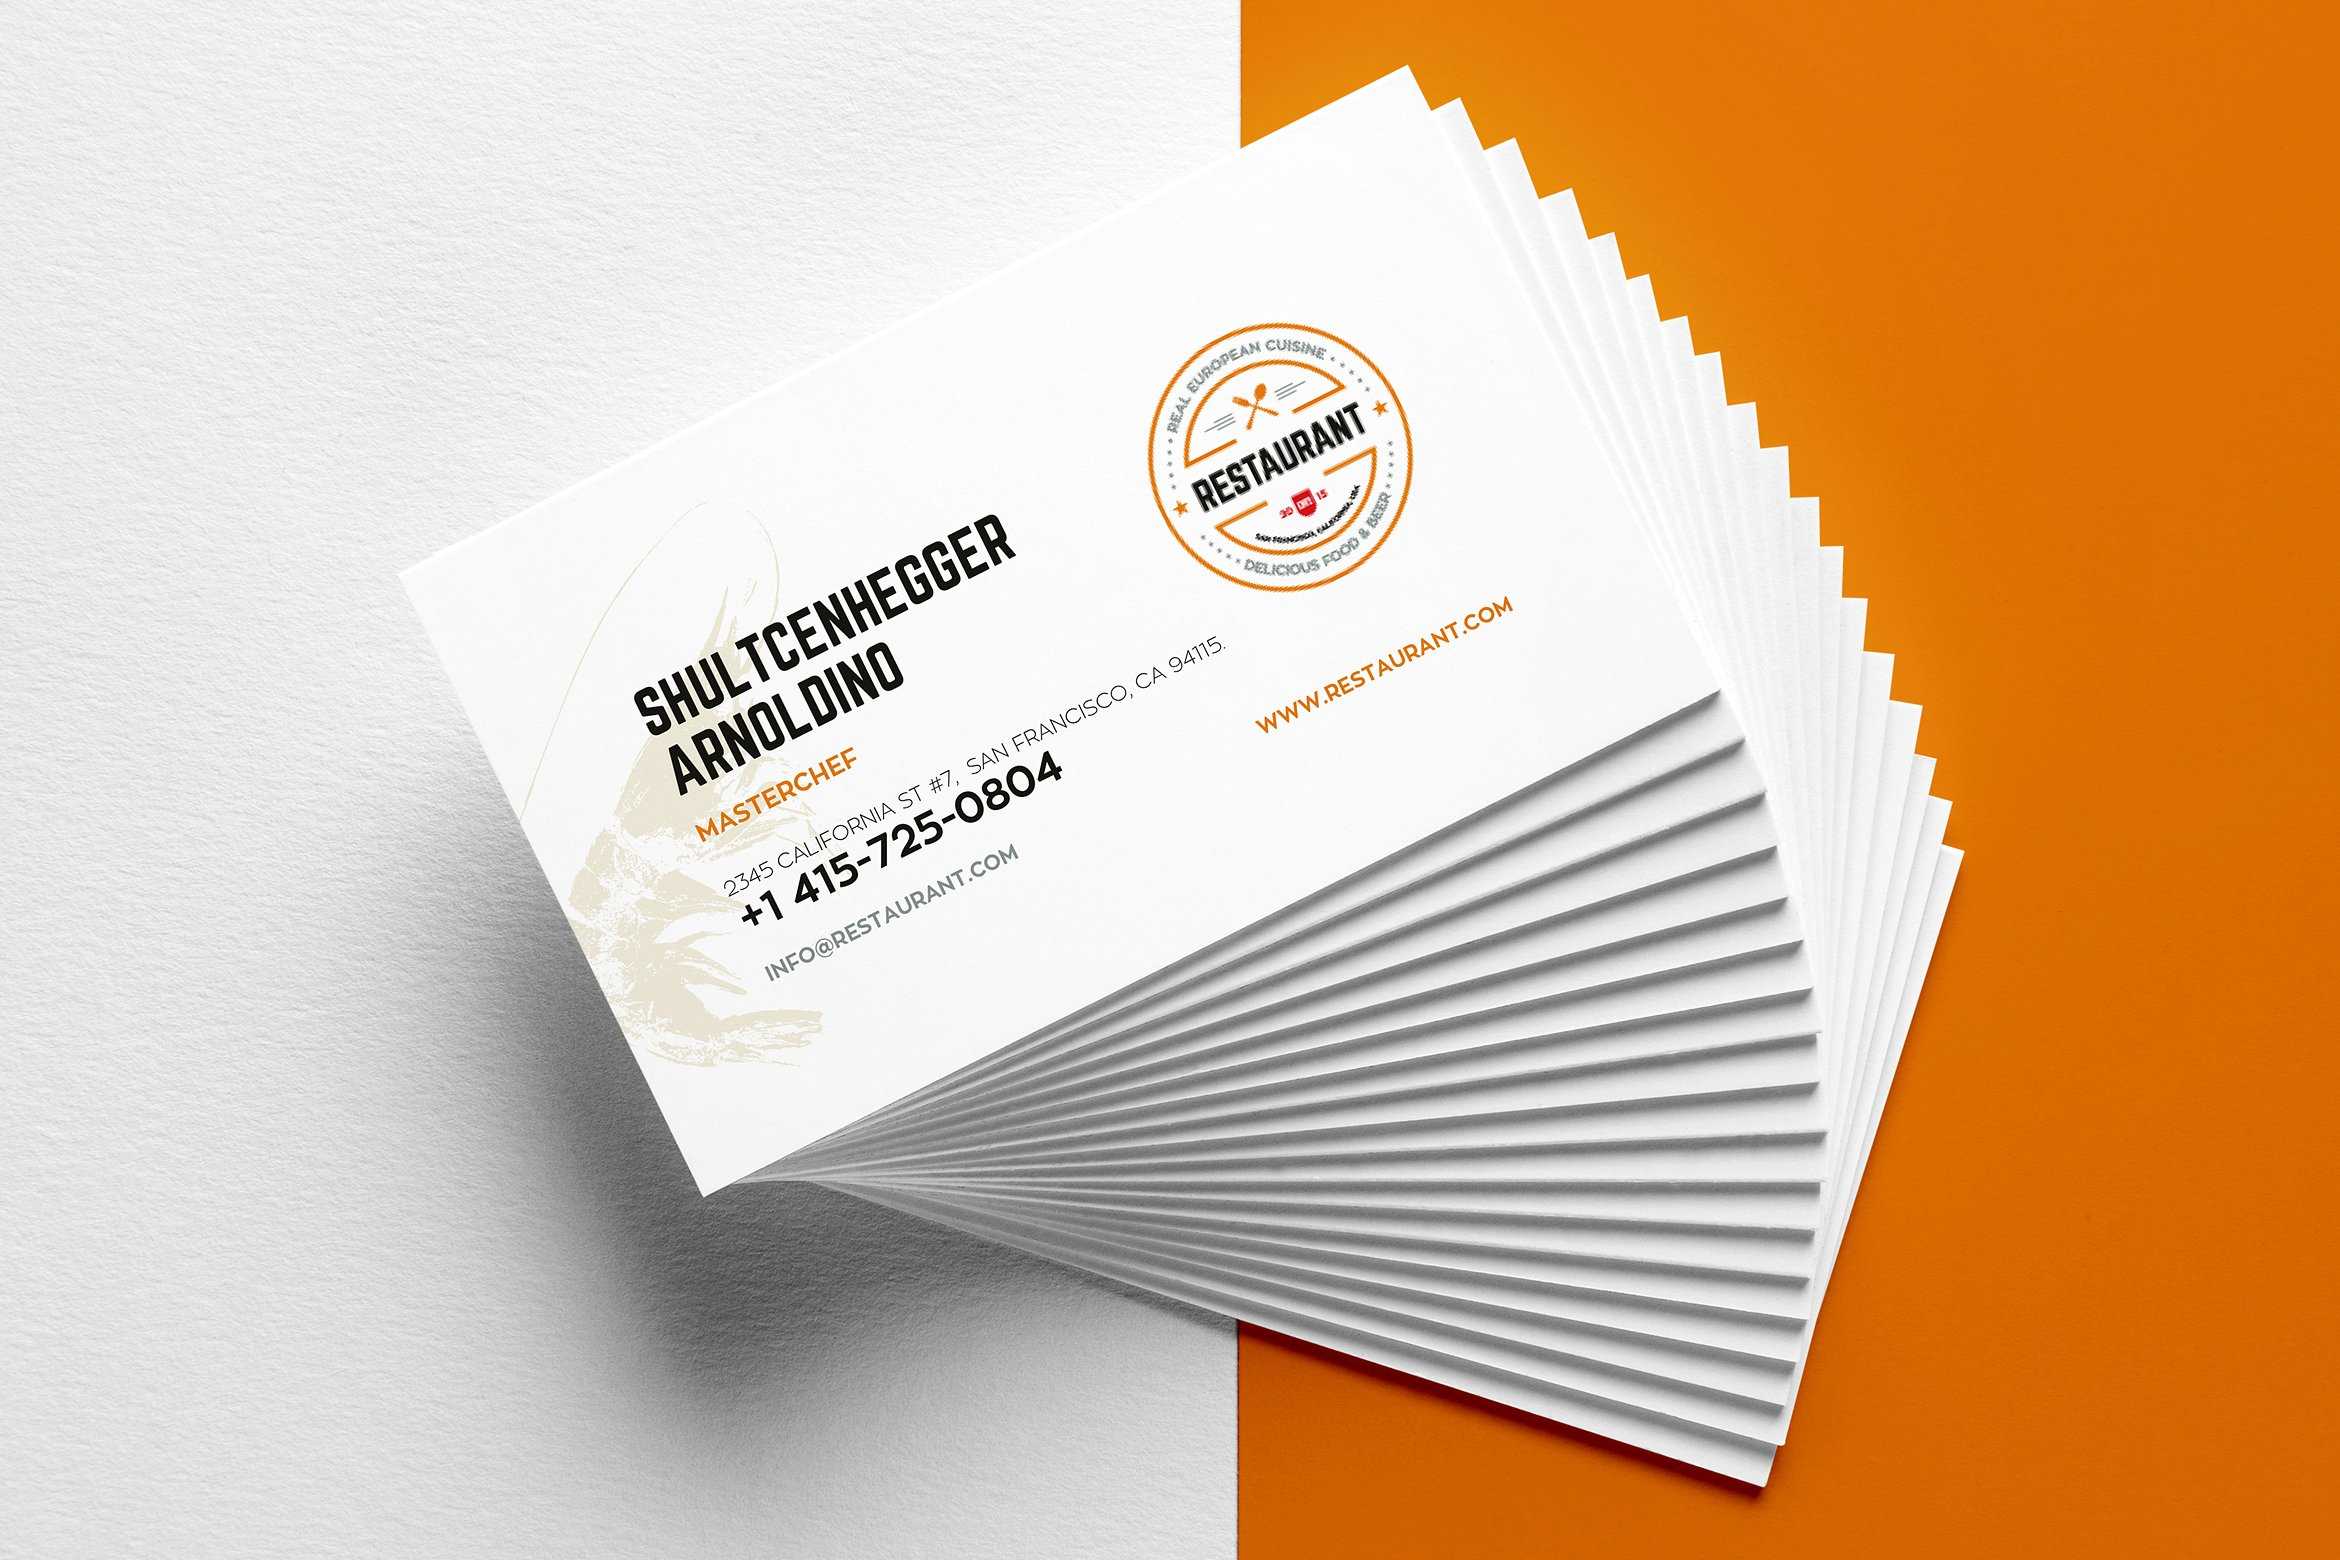 30+ Delicate Restaurant Business Card Templates | Decolore In Restaurant Business Cards Templates Free